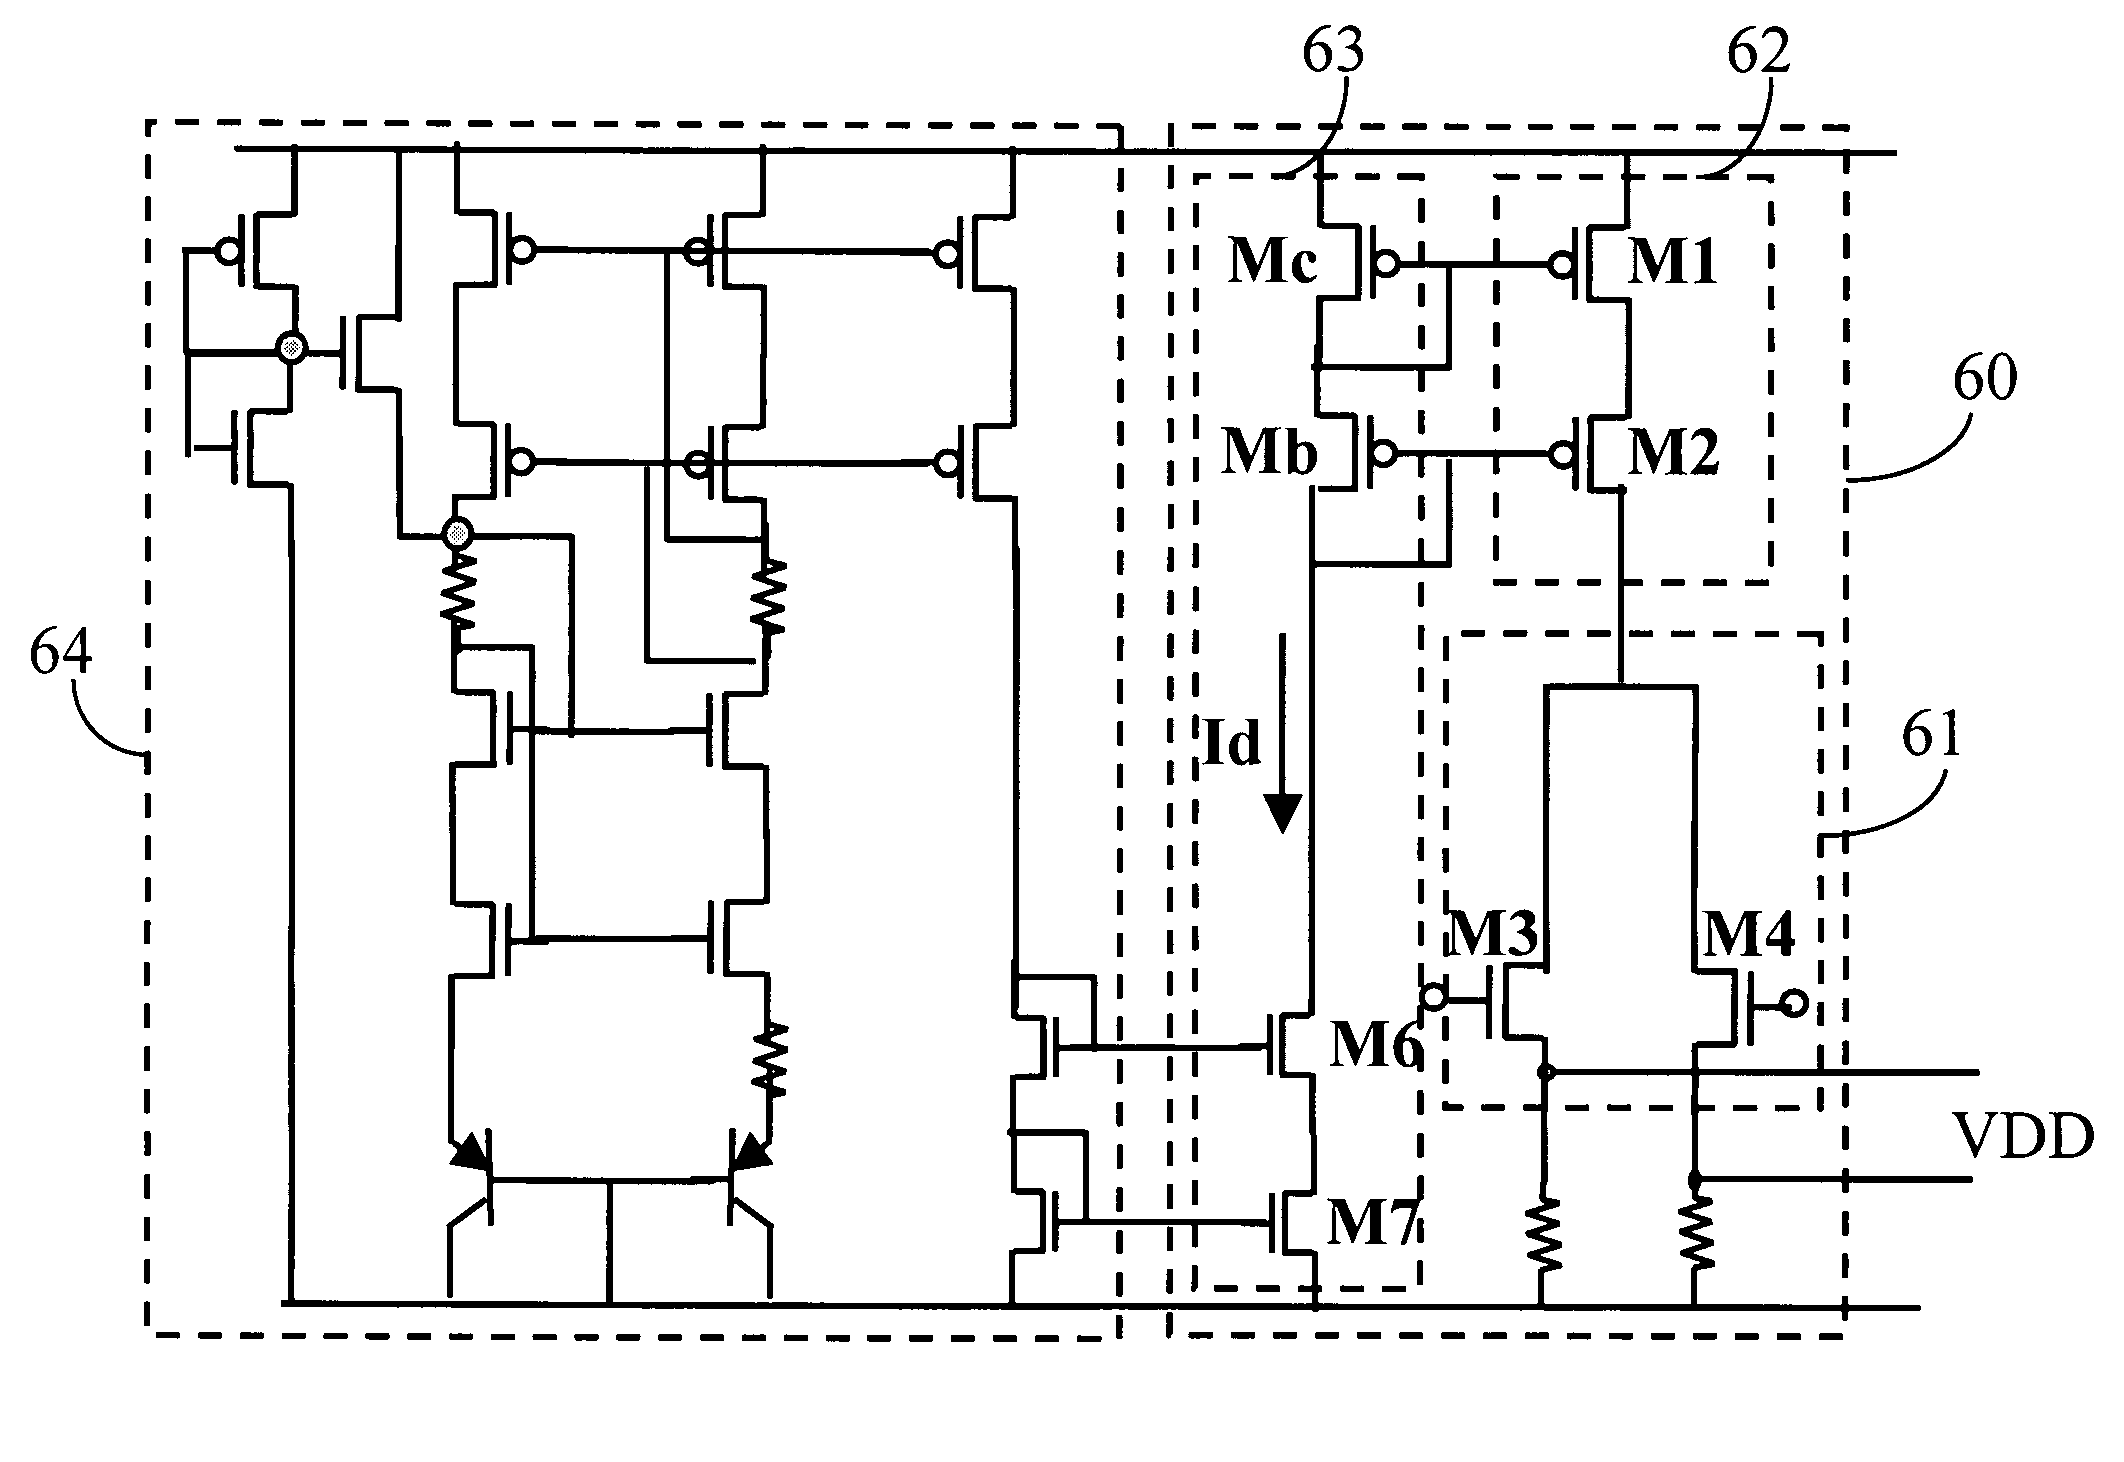 Constant current source with threshold voltage and channel length modulation compensation